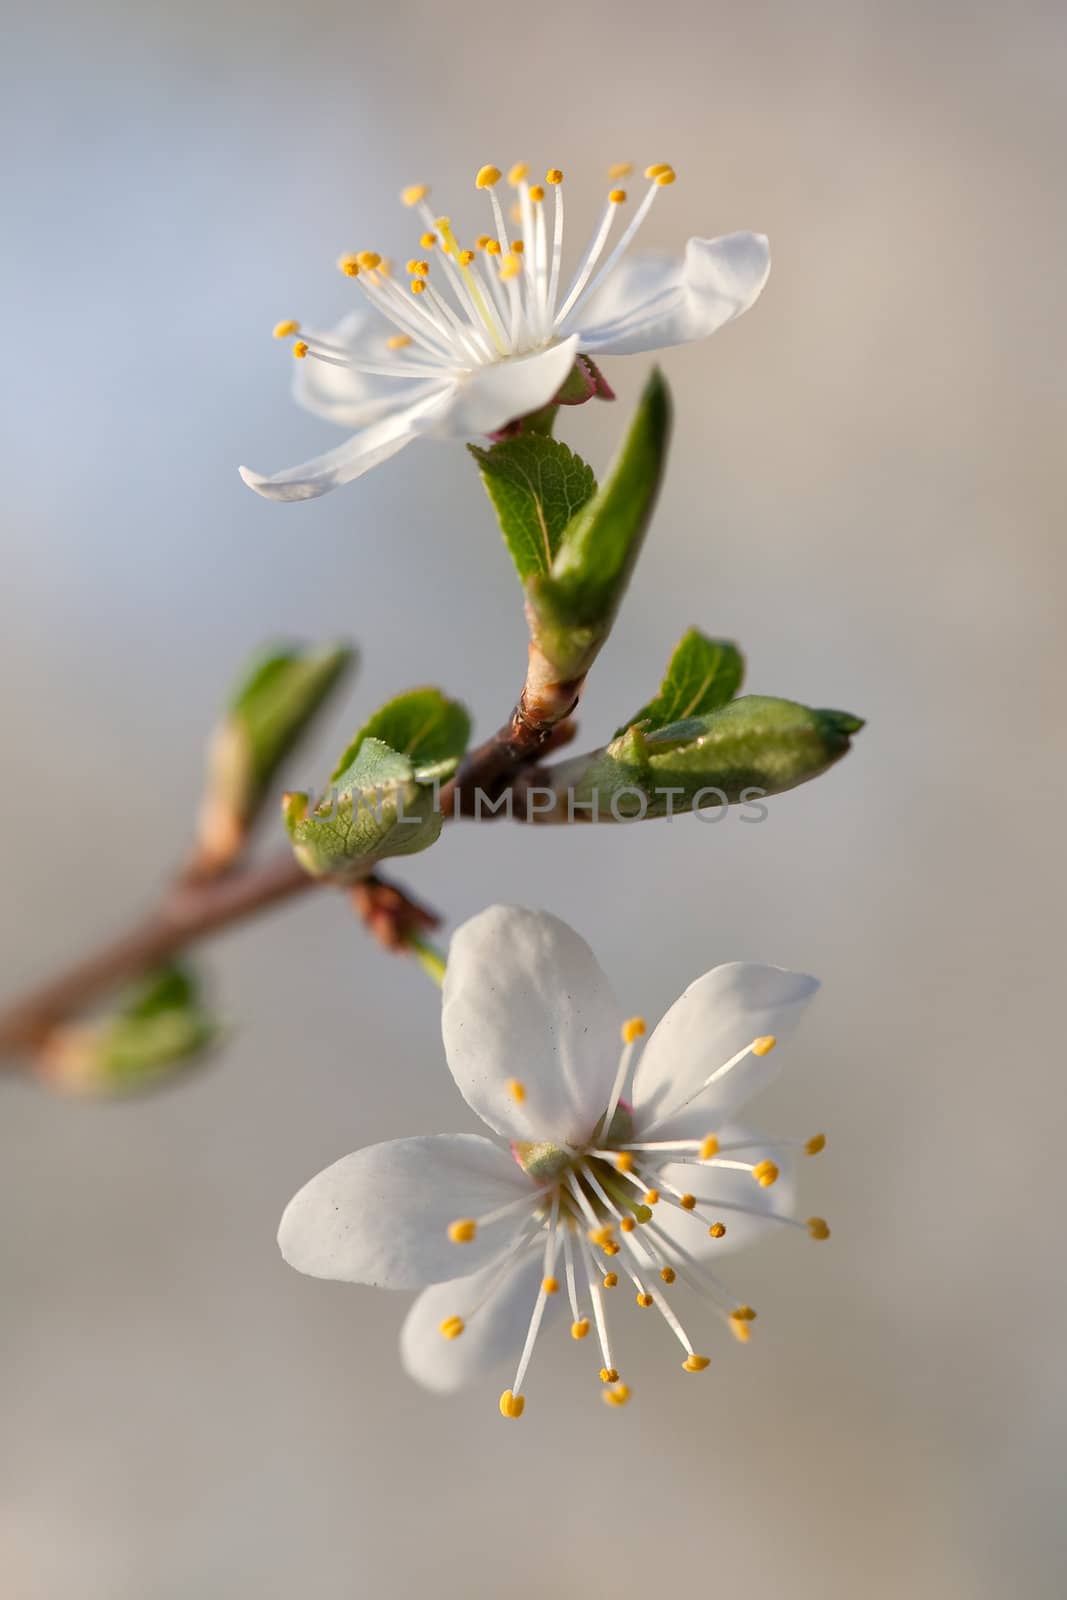 Soft wild plum flowers unfold in early spring